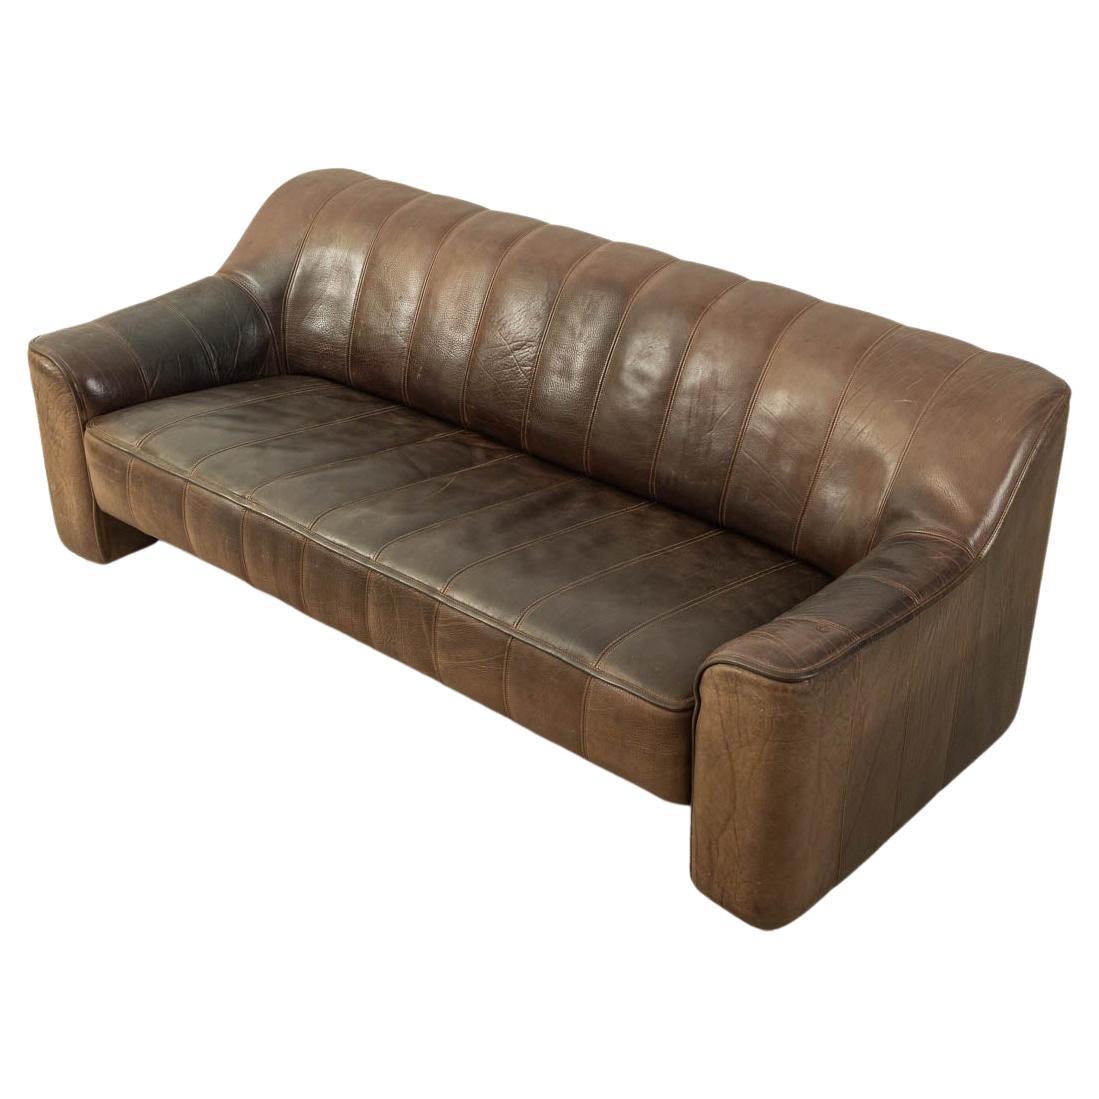 Sofa Model Ds-44 by Desede from the 1970s, Original Leather Cover, Made in Swiss For Sale